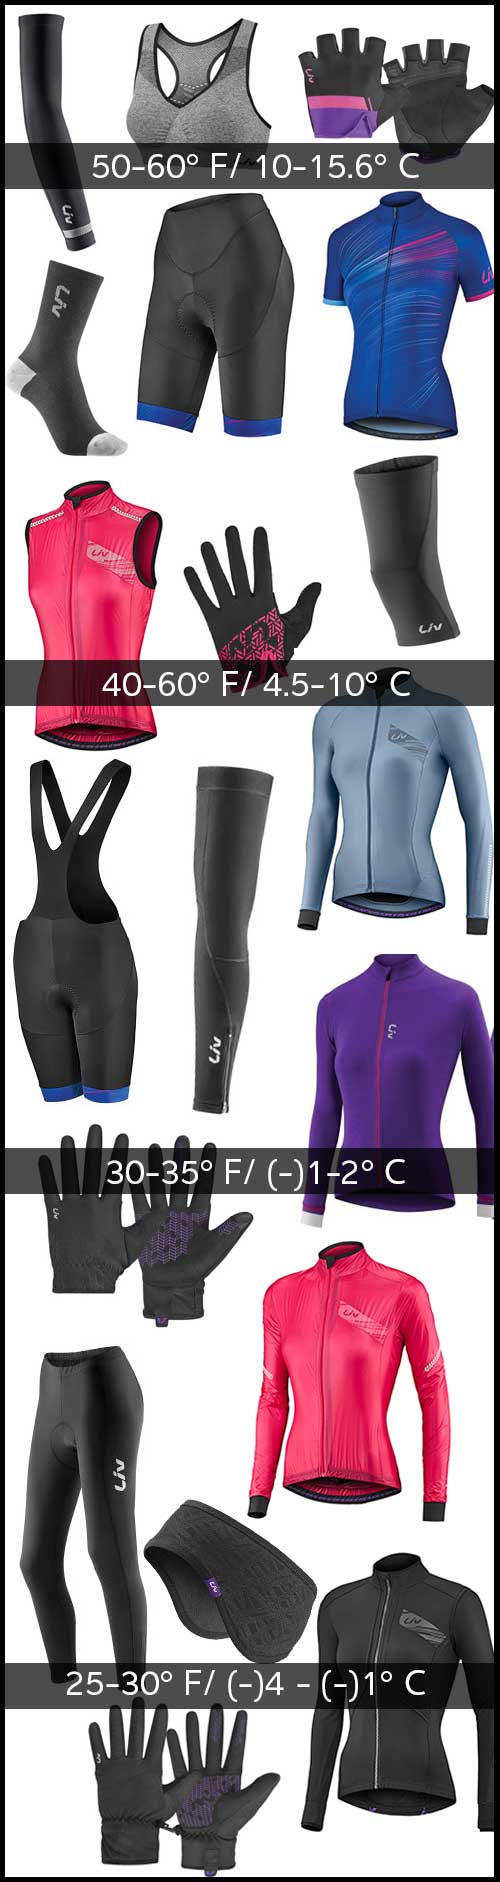 Cycling Clothing, What to Wear in Different Temperatures